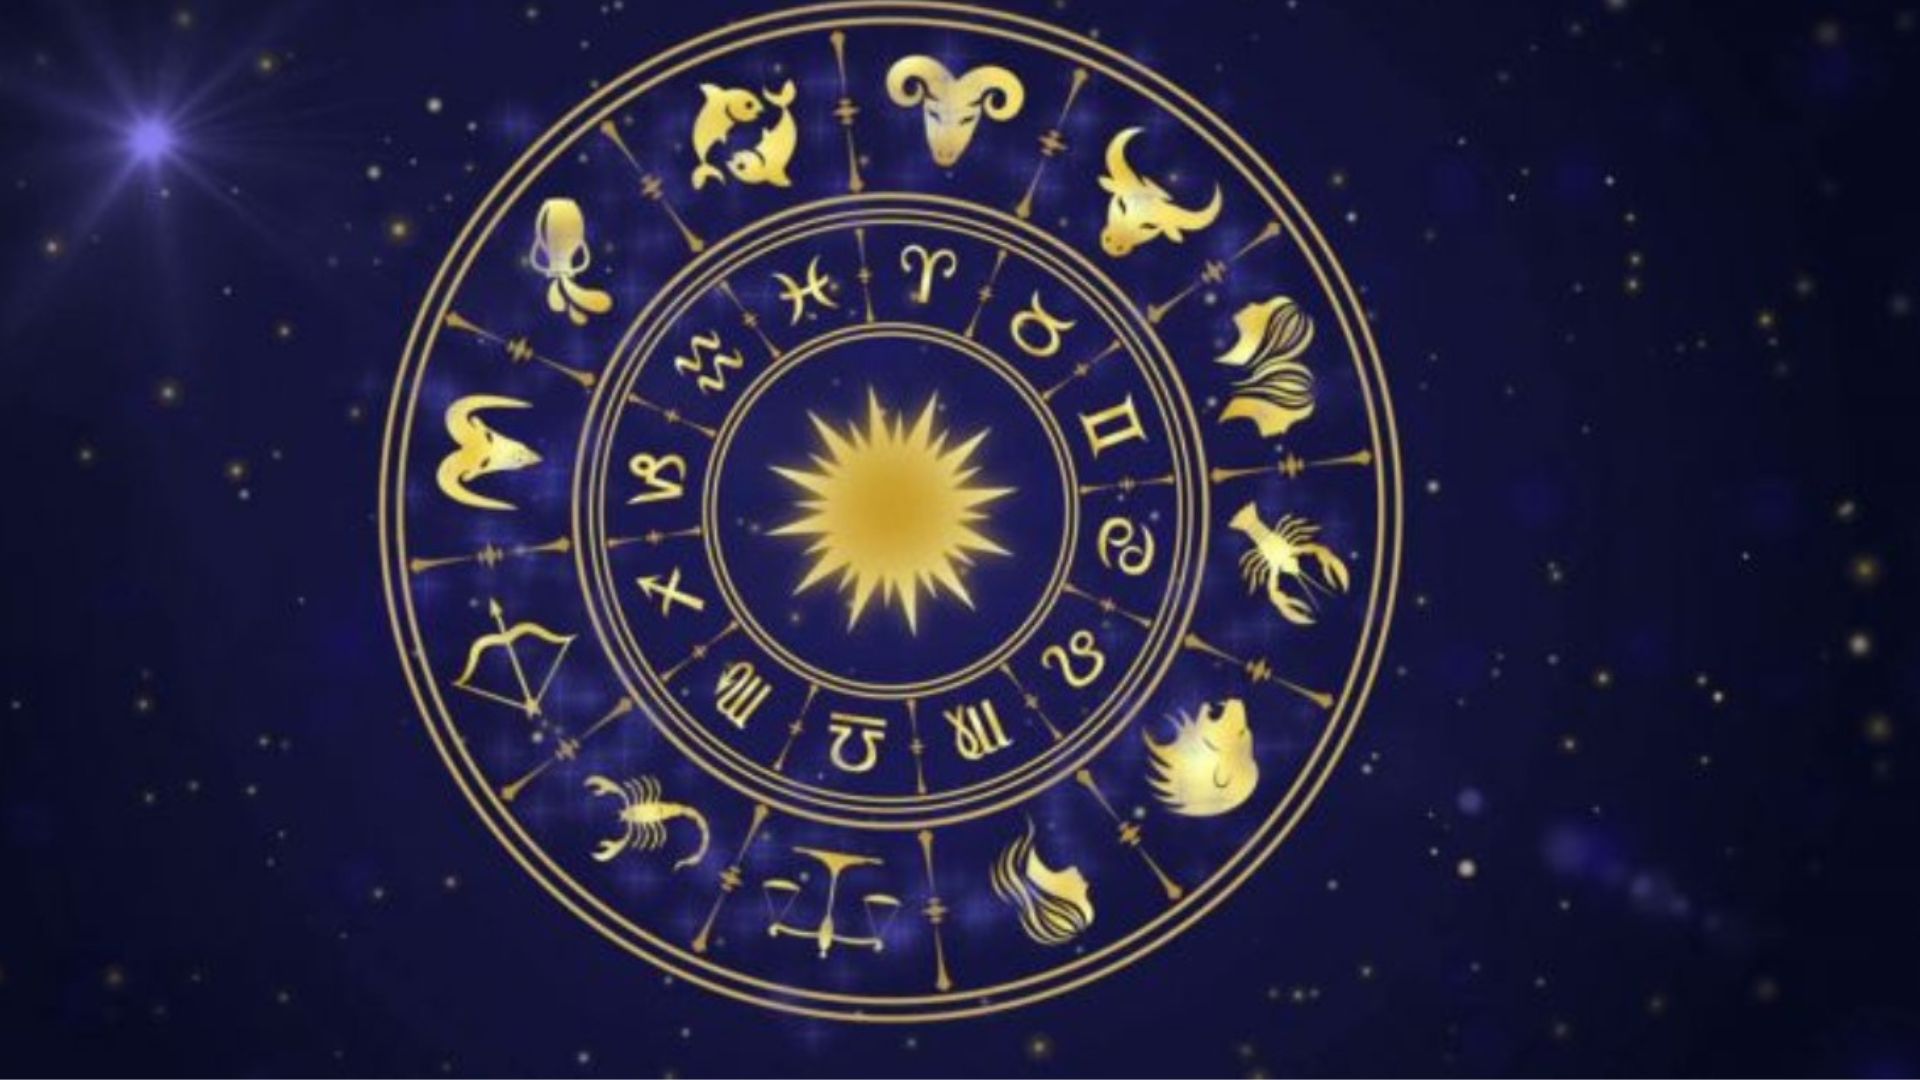 All Astrology Signs In A Wheel